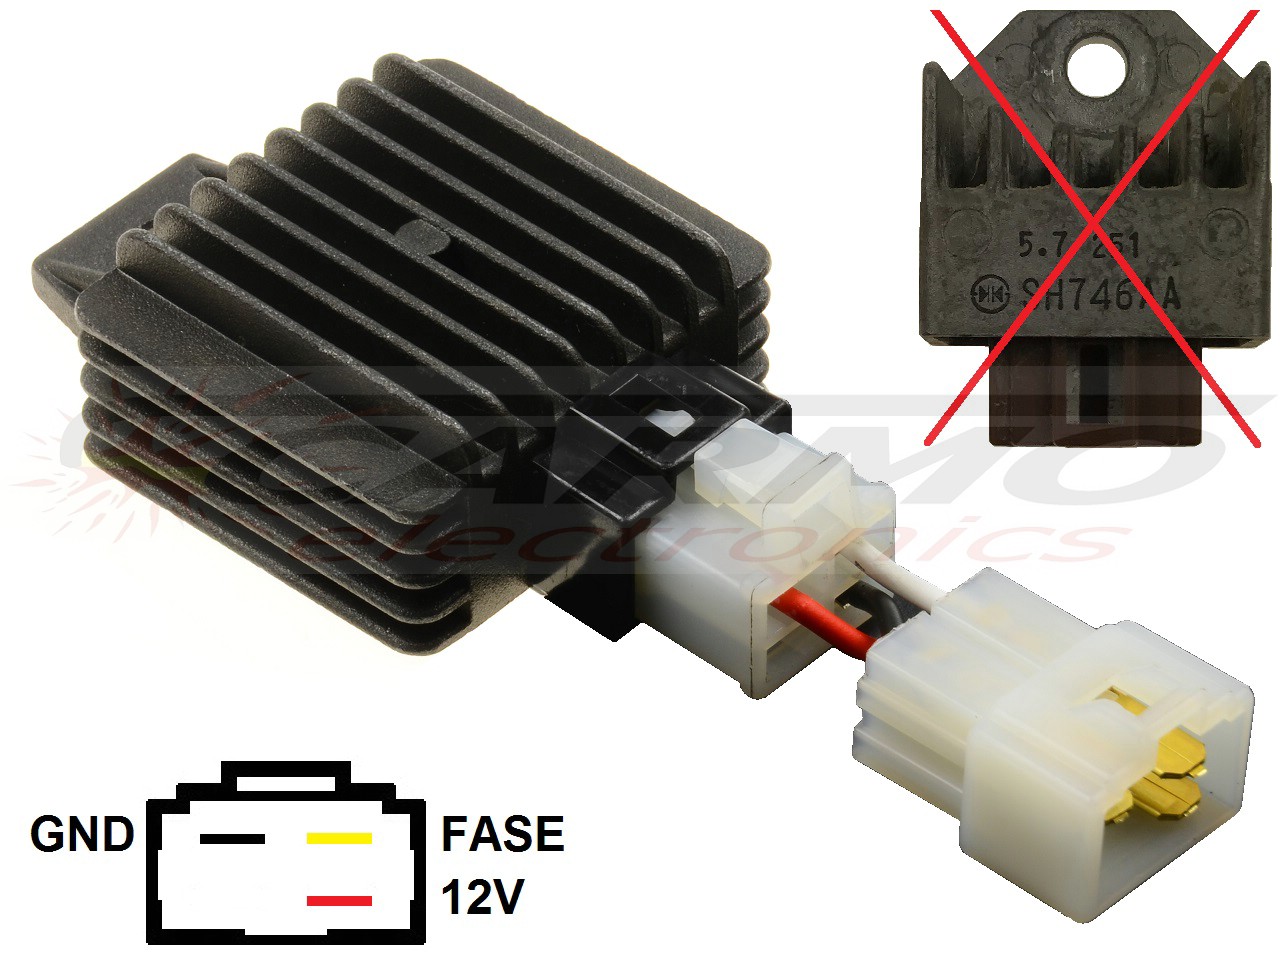 CARR9852 SH746AA voltage regulator (improved) - Click Image to Close